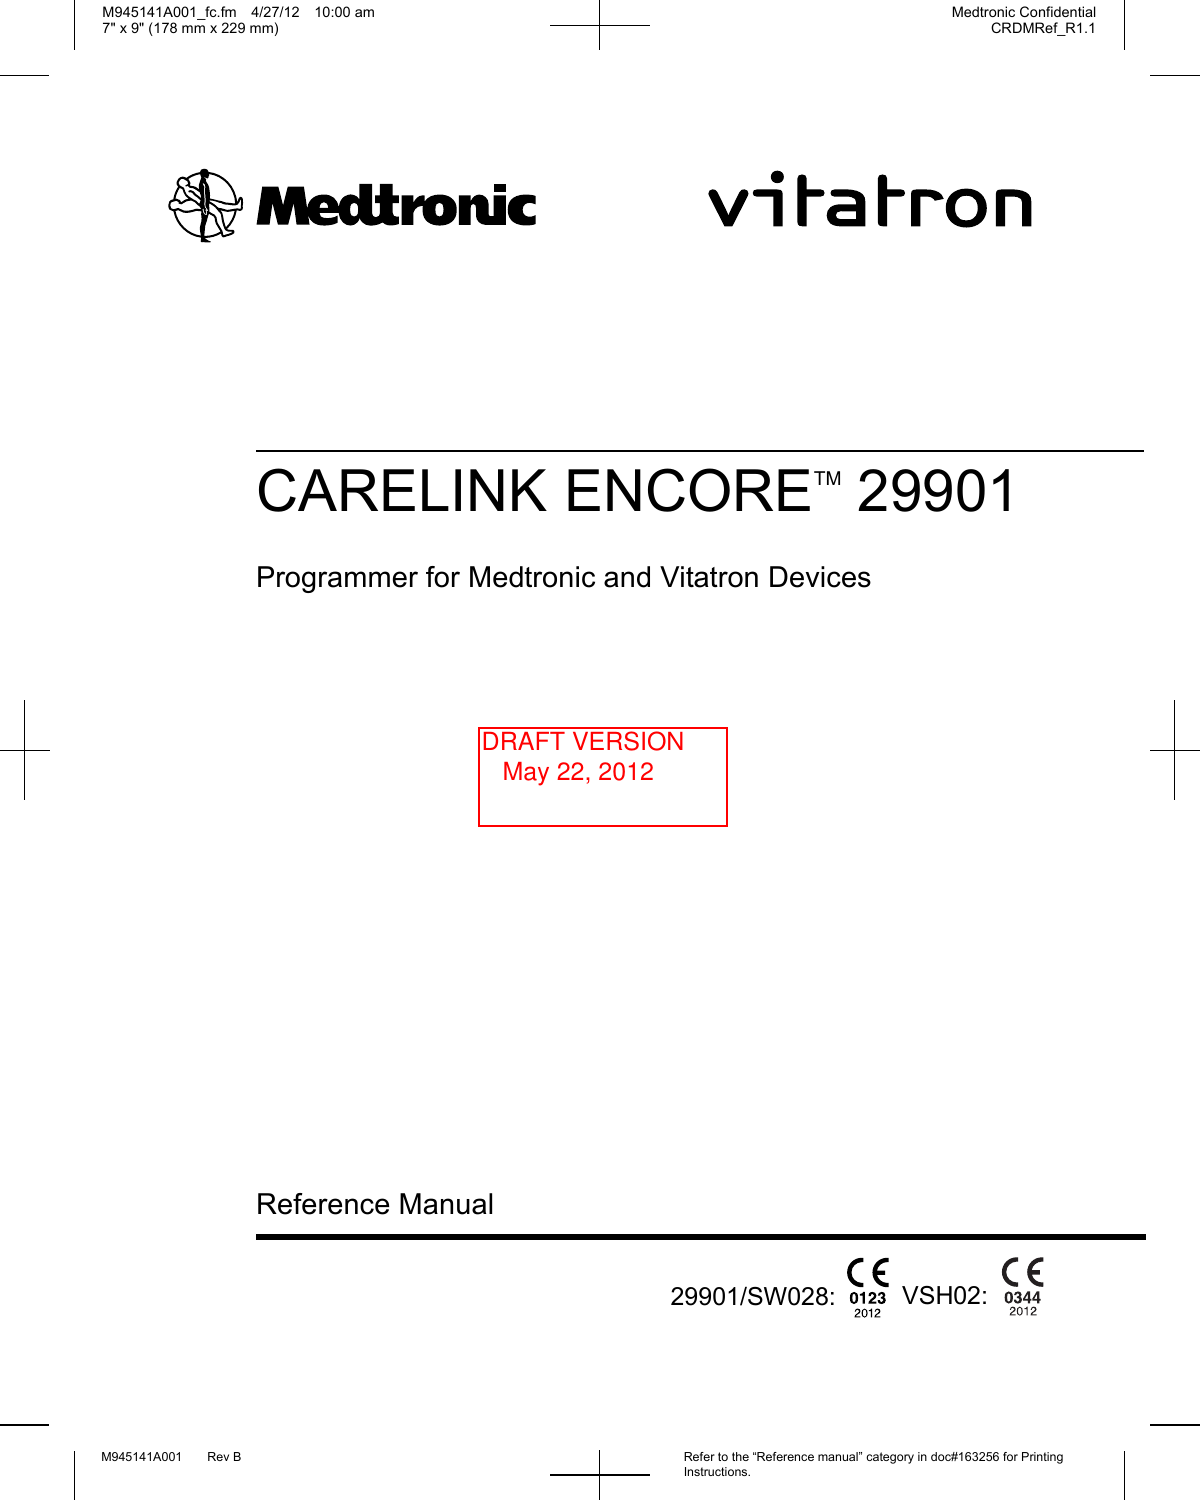 Medtronic Confidential CRDMRef_R1.1M945141A001_fc.fm 4/27/12 10:00 am7&quot; x 9&quot; (178 mm x 229 mm)M945141A001 Rev B Refer to the “Reference manual” category in doc#163256 for Printing Instructions.CARELINK ENCORETM 29901Programmer for Medtronic and Vitatron DevicesReference Manual                                                                  29901/SW028: VSH02:DRAFT VERSION    May 22, 2012